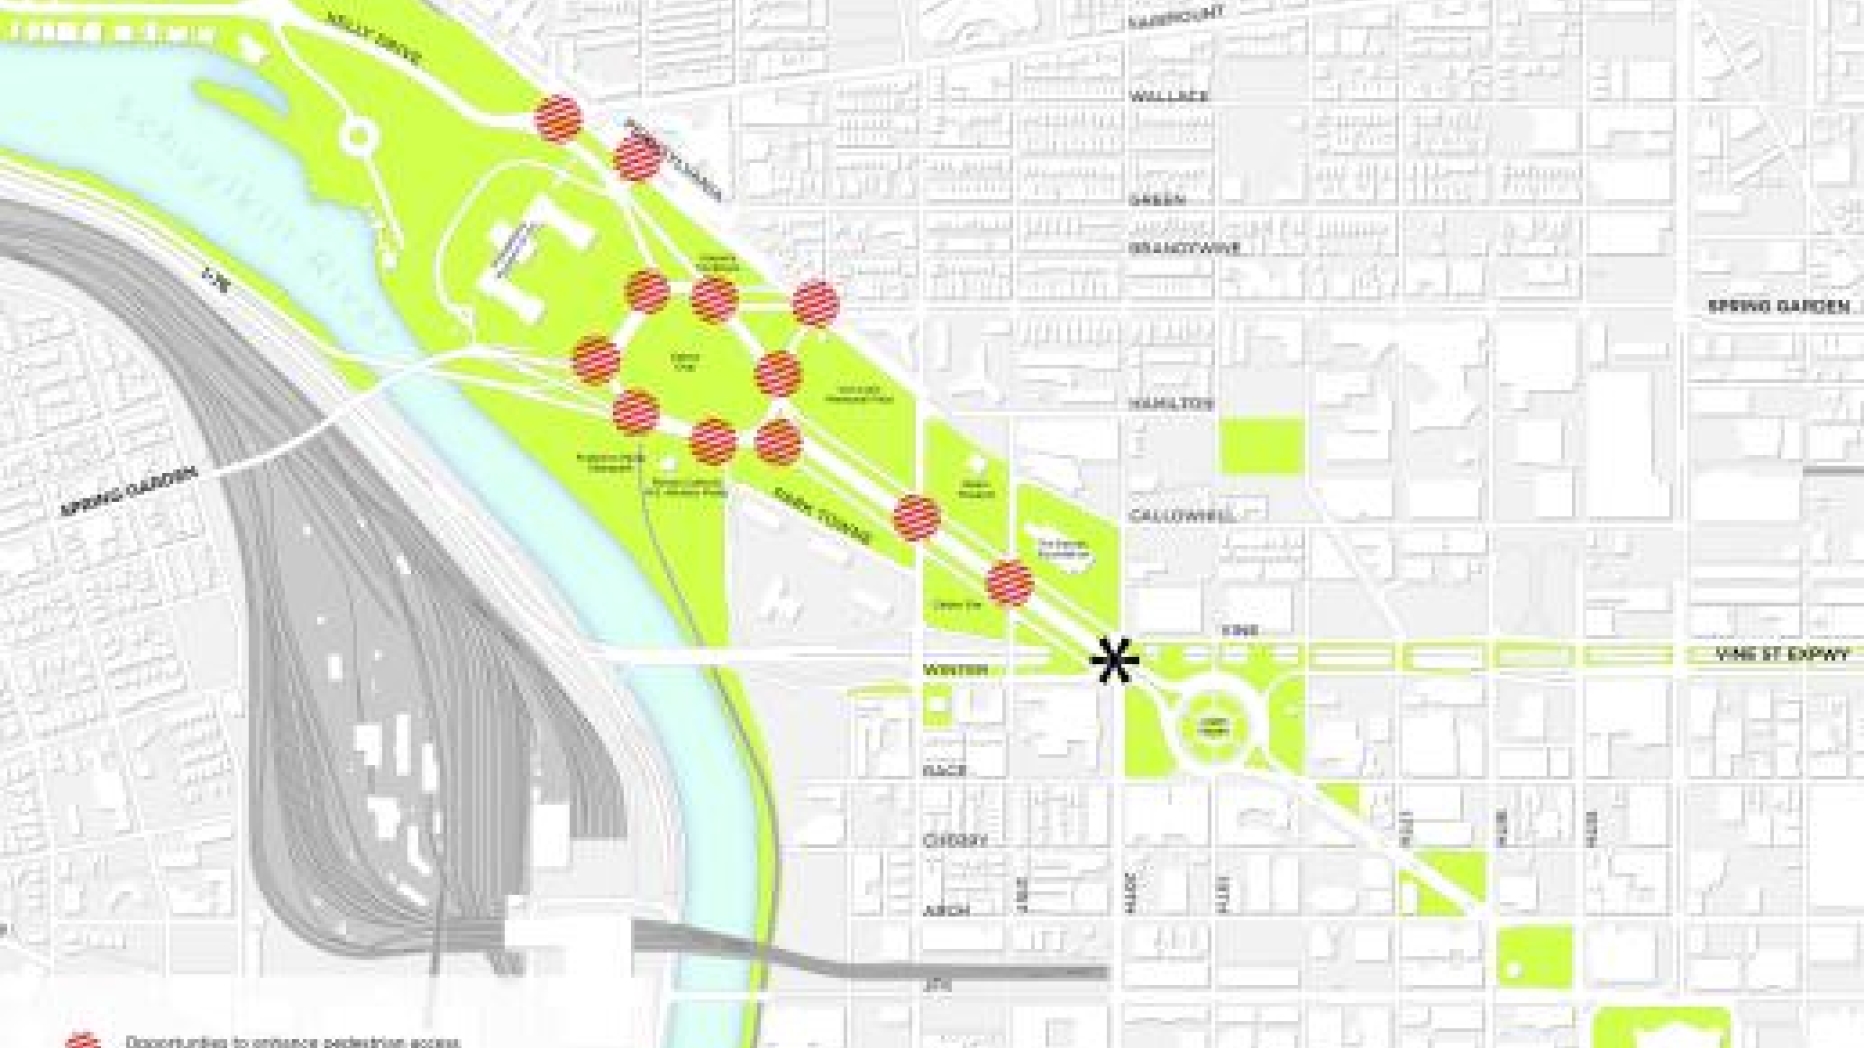 Map of Benjamin Franklin Parkway with various locations for potential improvement highlighted.